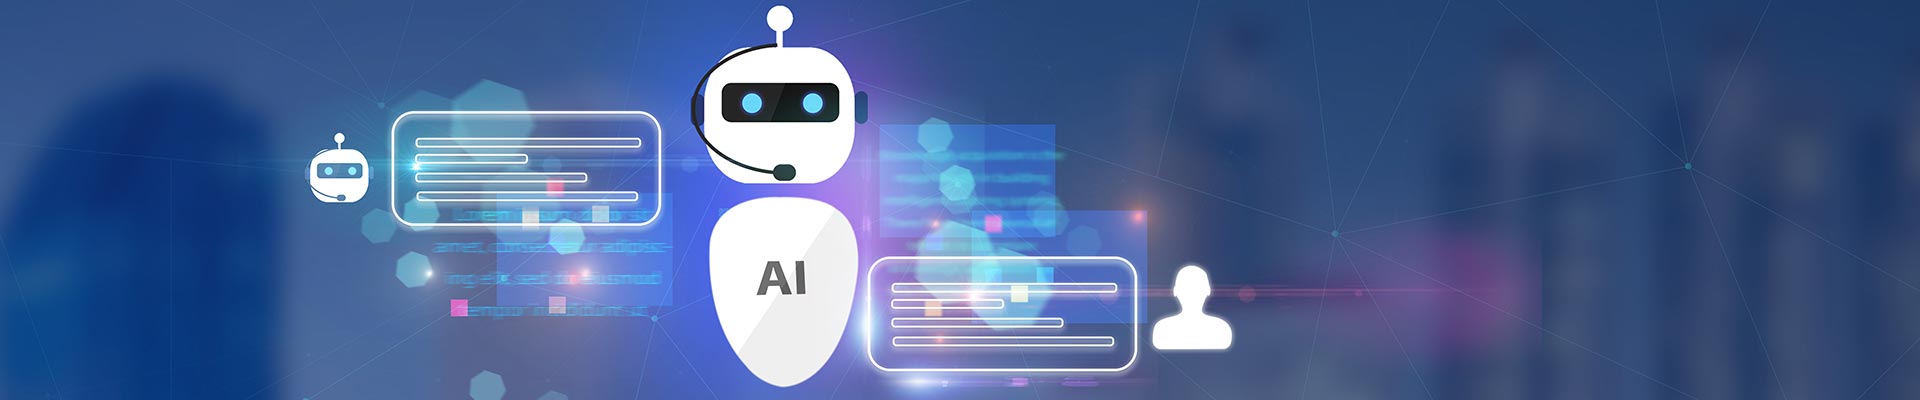 Webcast on AI-supported chatbots 